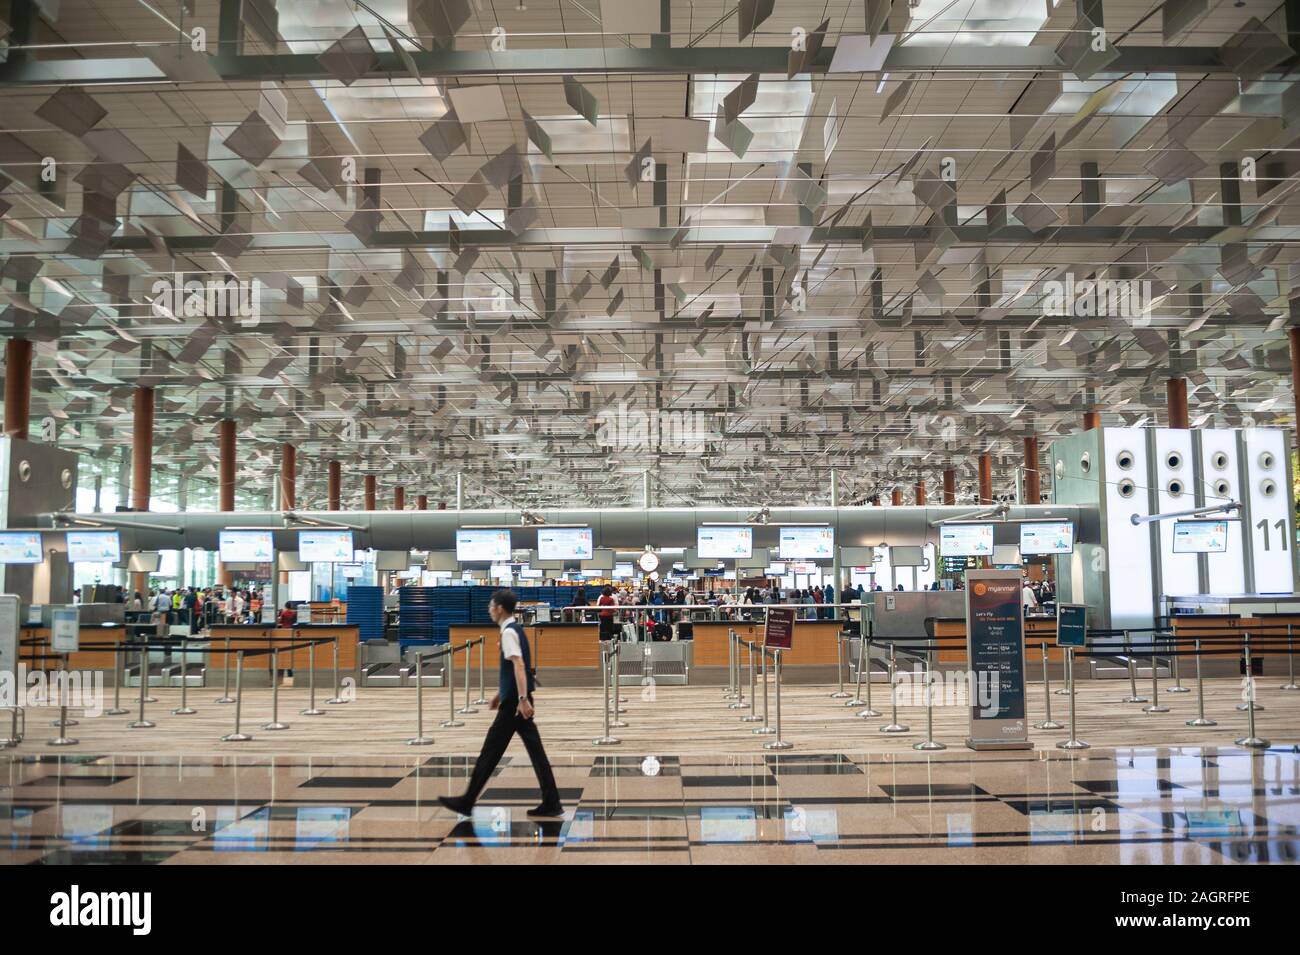 06.12.2019, Singapore, Republic of Singapore, Asia - A view of the departure hall with check-in area inside Terminal 3 at Changi Airport. Stock Photo